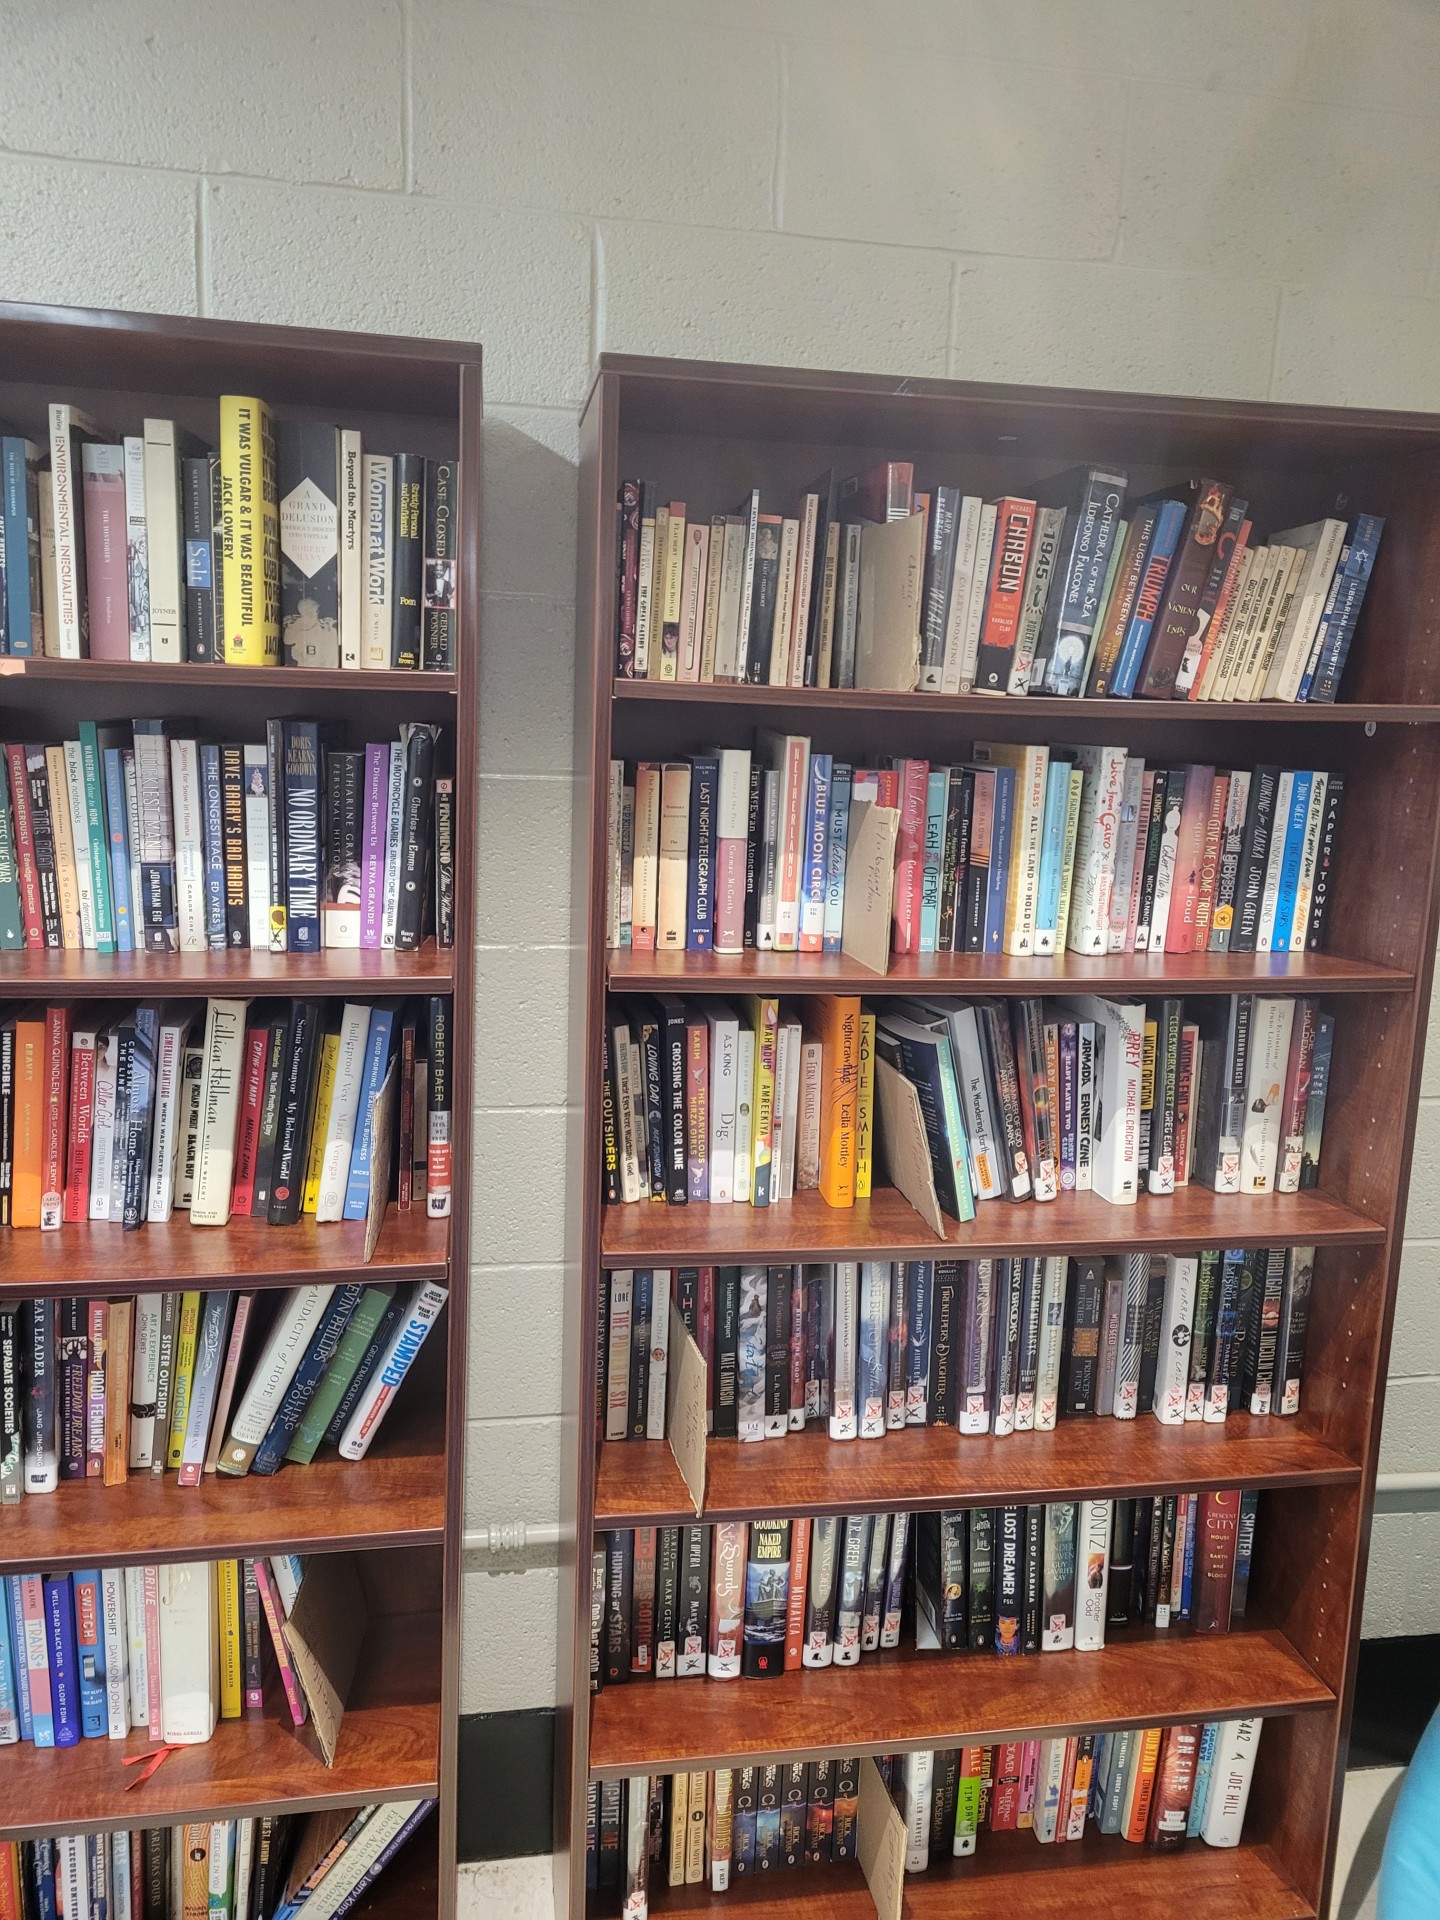 An example of fully organized shelves in the library